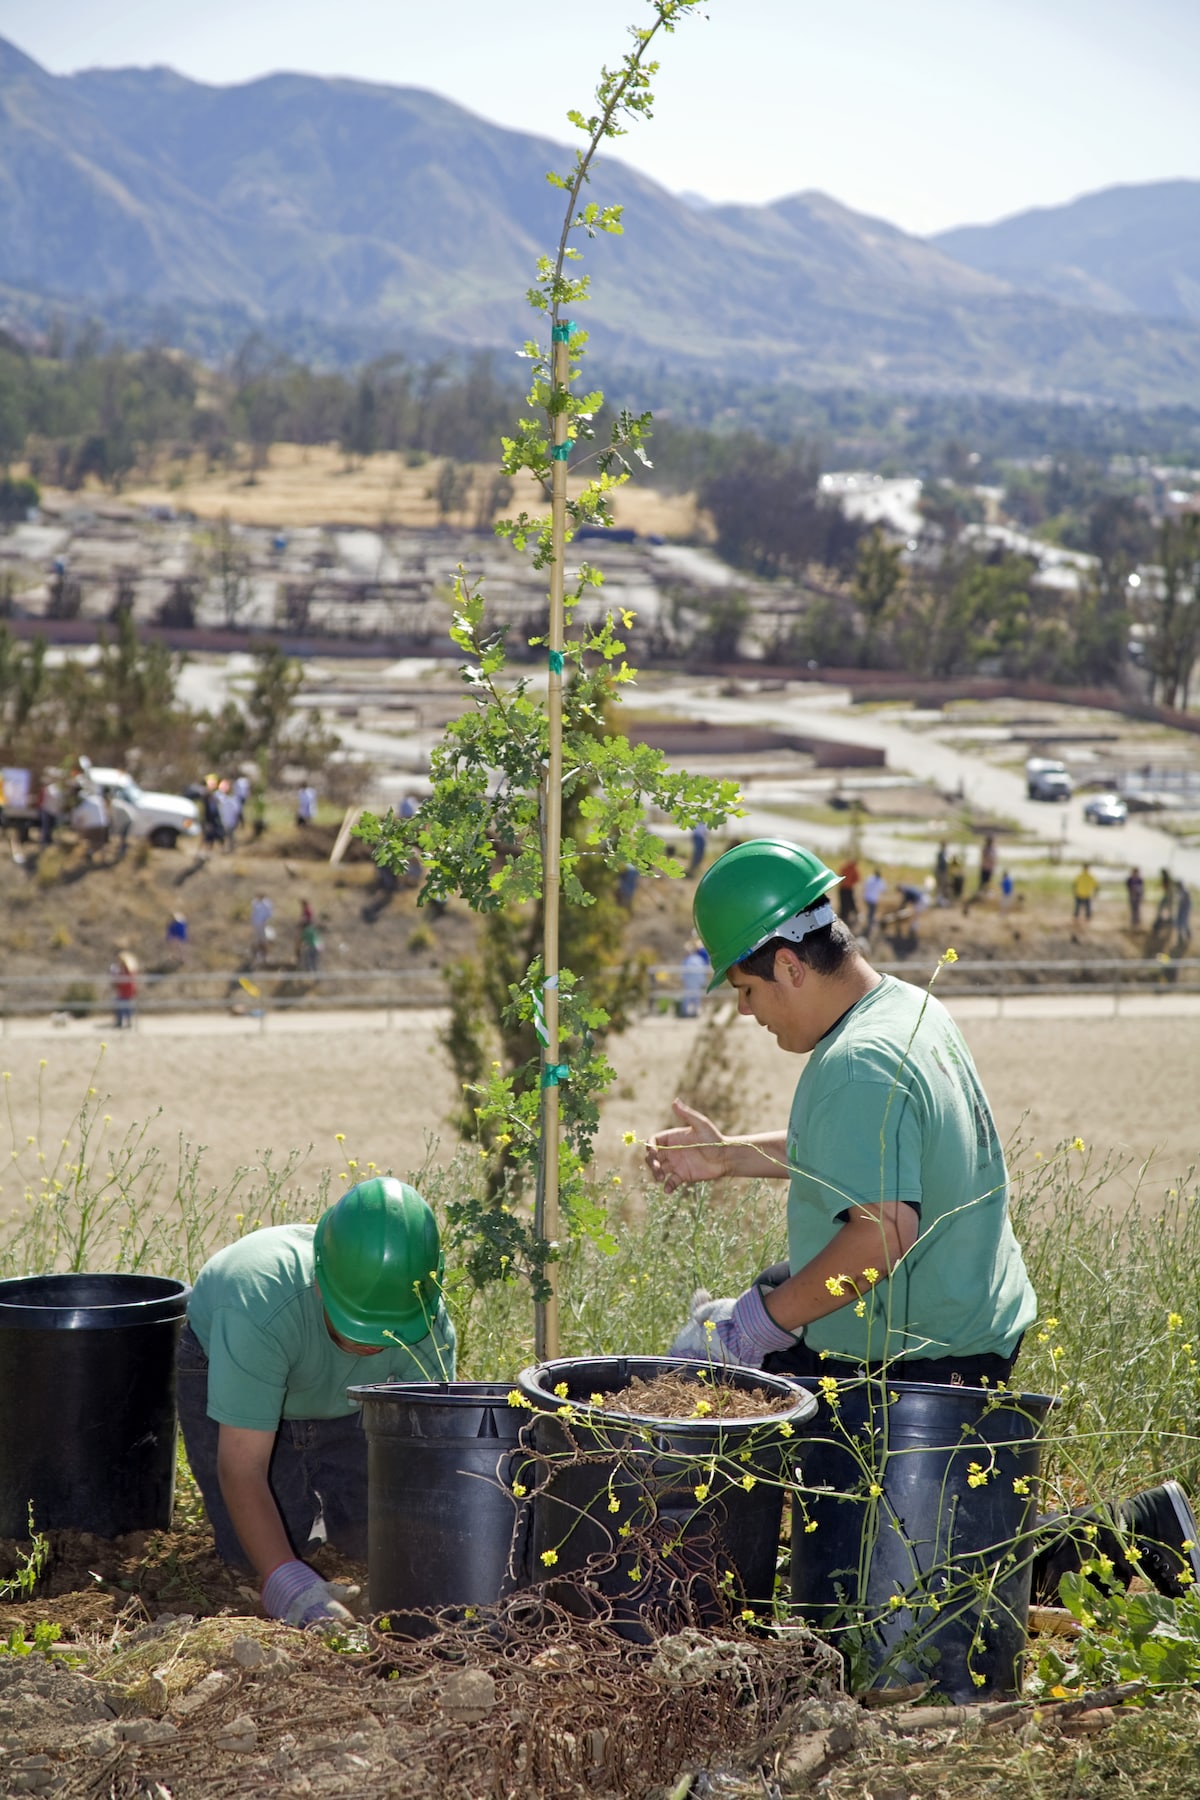 LA Conservation Corps plant a tree to help reforest an area devasted by wildfires